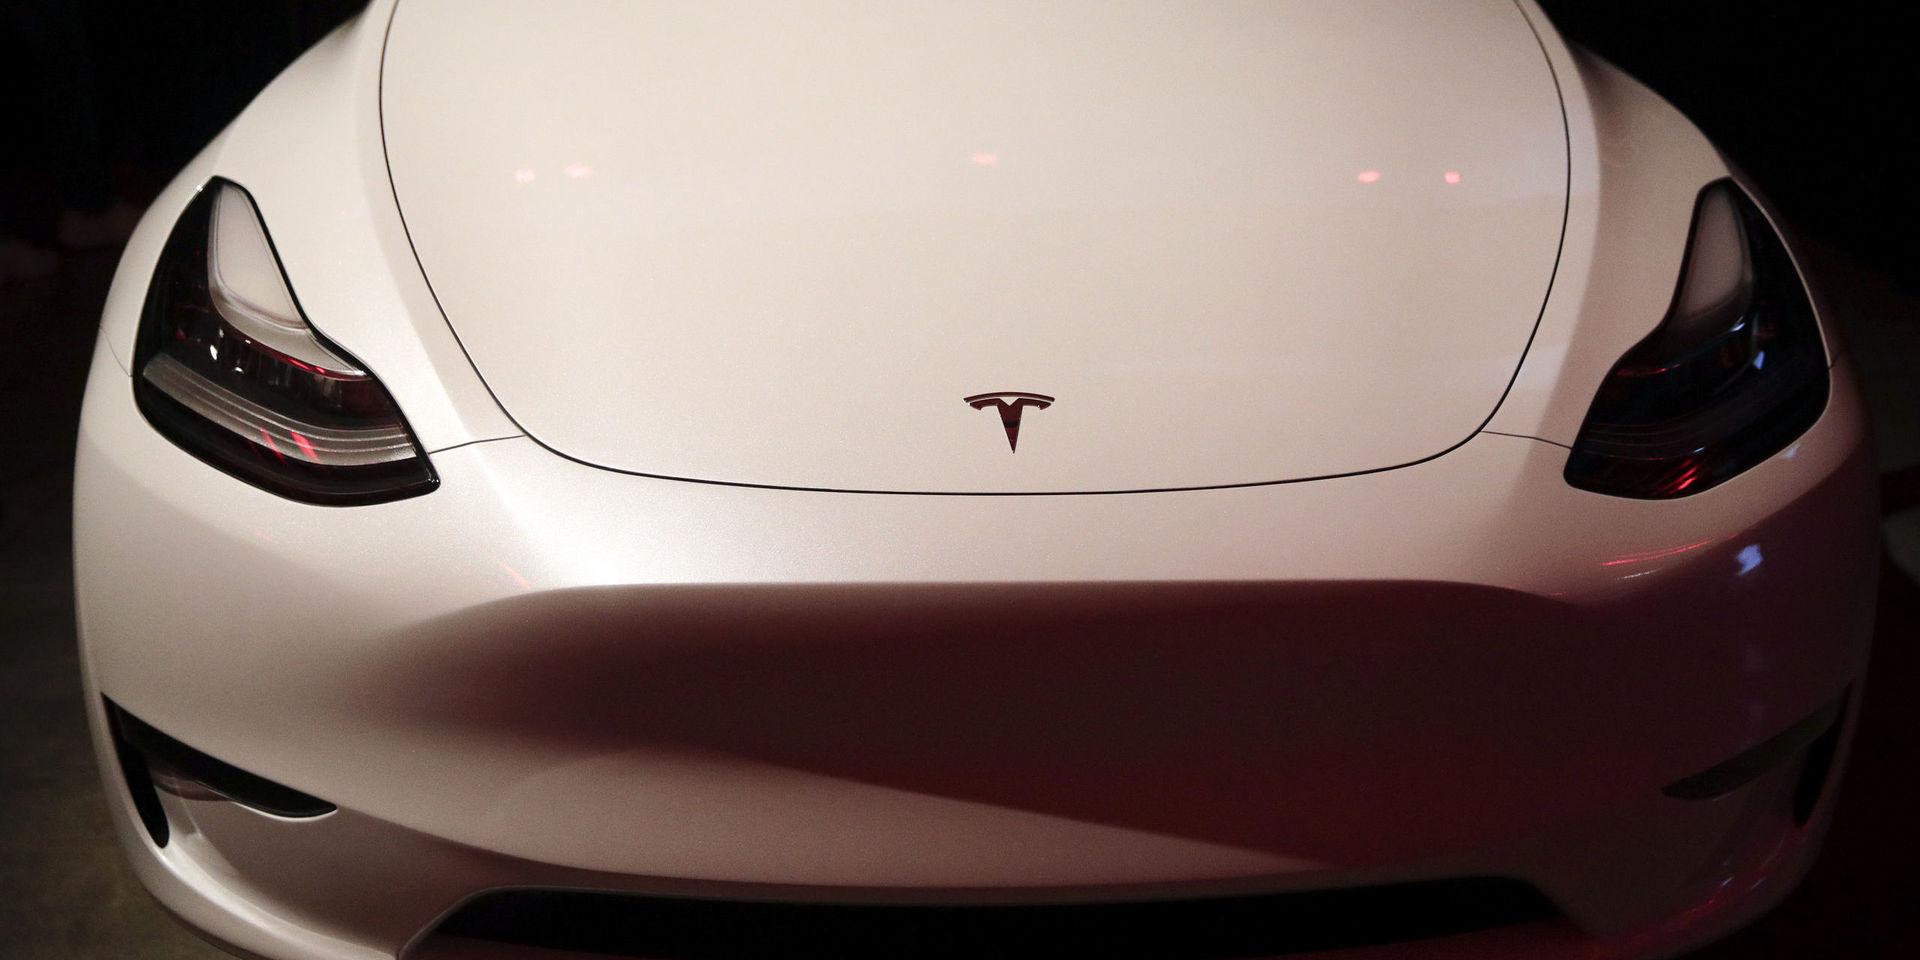 Tesla&apos;s Model Y is displayed at the company&apos;s design studio Thursday, March 14, 2019, in Hawthorne, Calif. The Model Y may be Tesla&apos;s most important product yet as it attempts to expand into the mainstream and generate enough cash to repay massive debts that threaten to topple the Palo Alto, California, company. (AP Photo/Jae C. Hong)